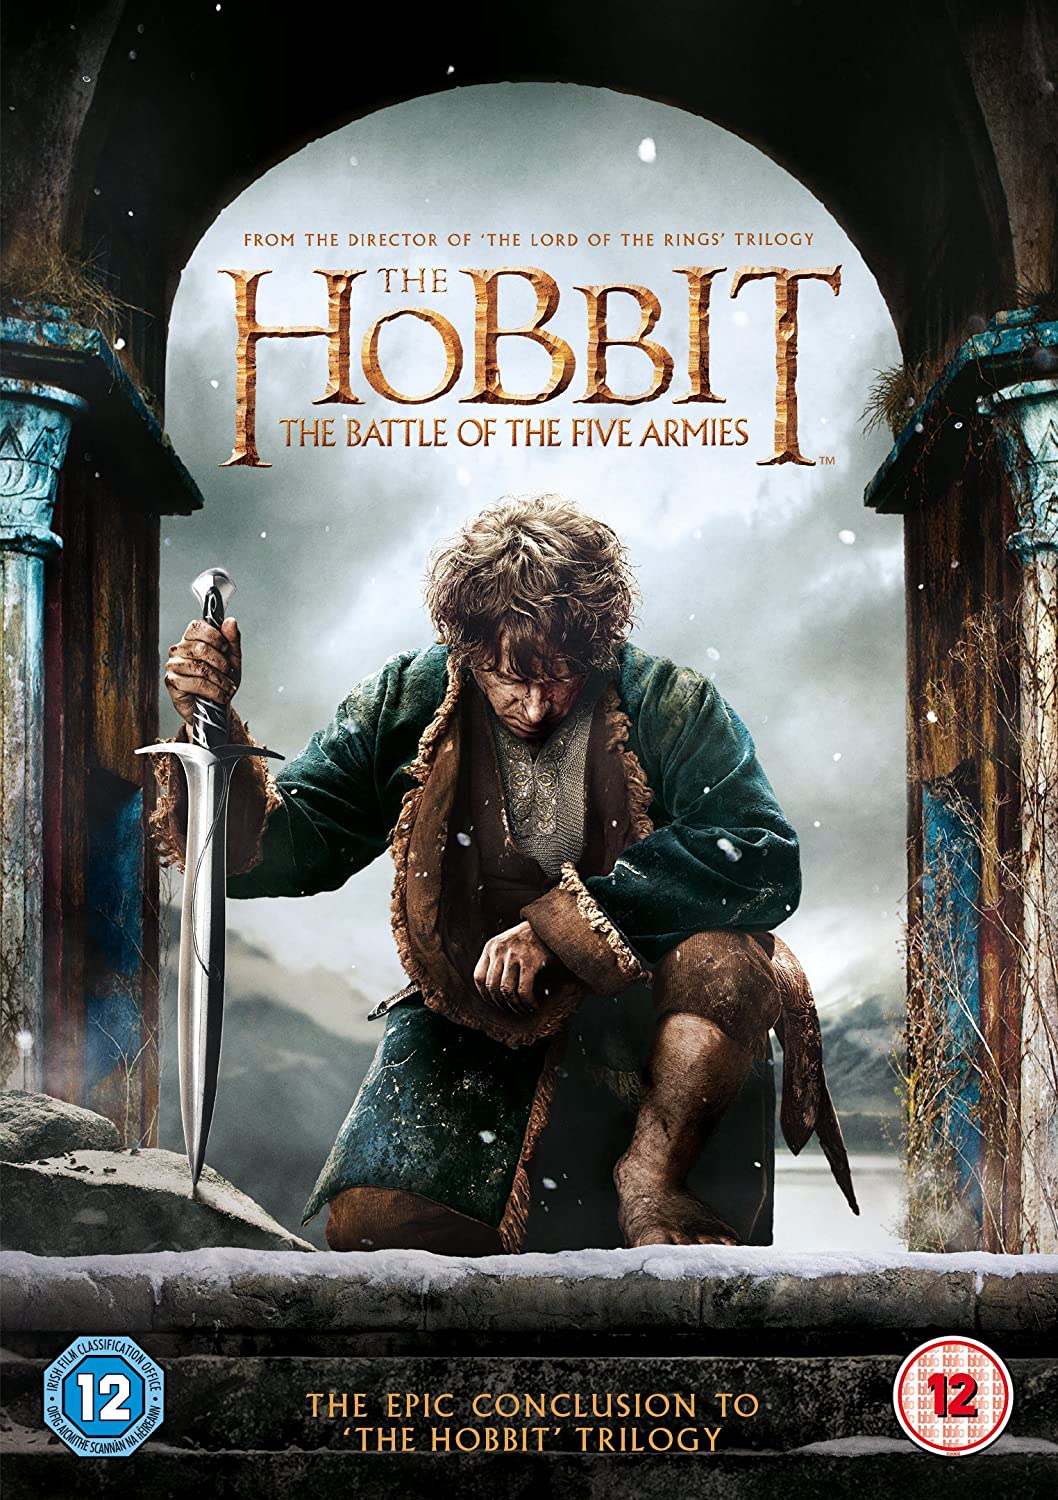 The Hobbit: The Battle of the Five Armies -  Fantasy/Adventure [DVD]